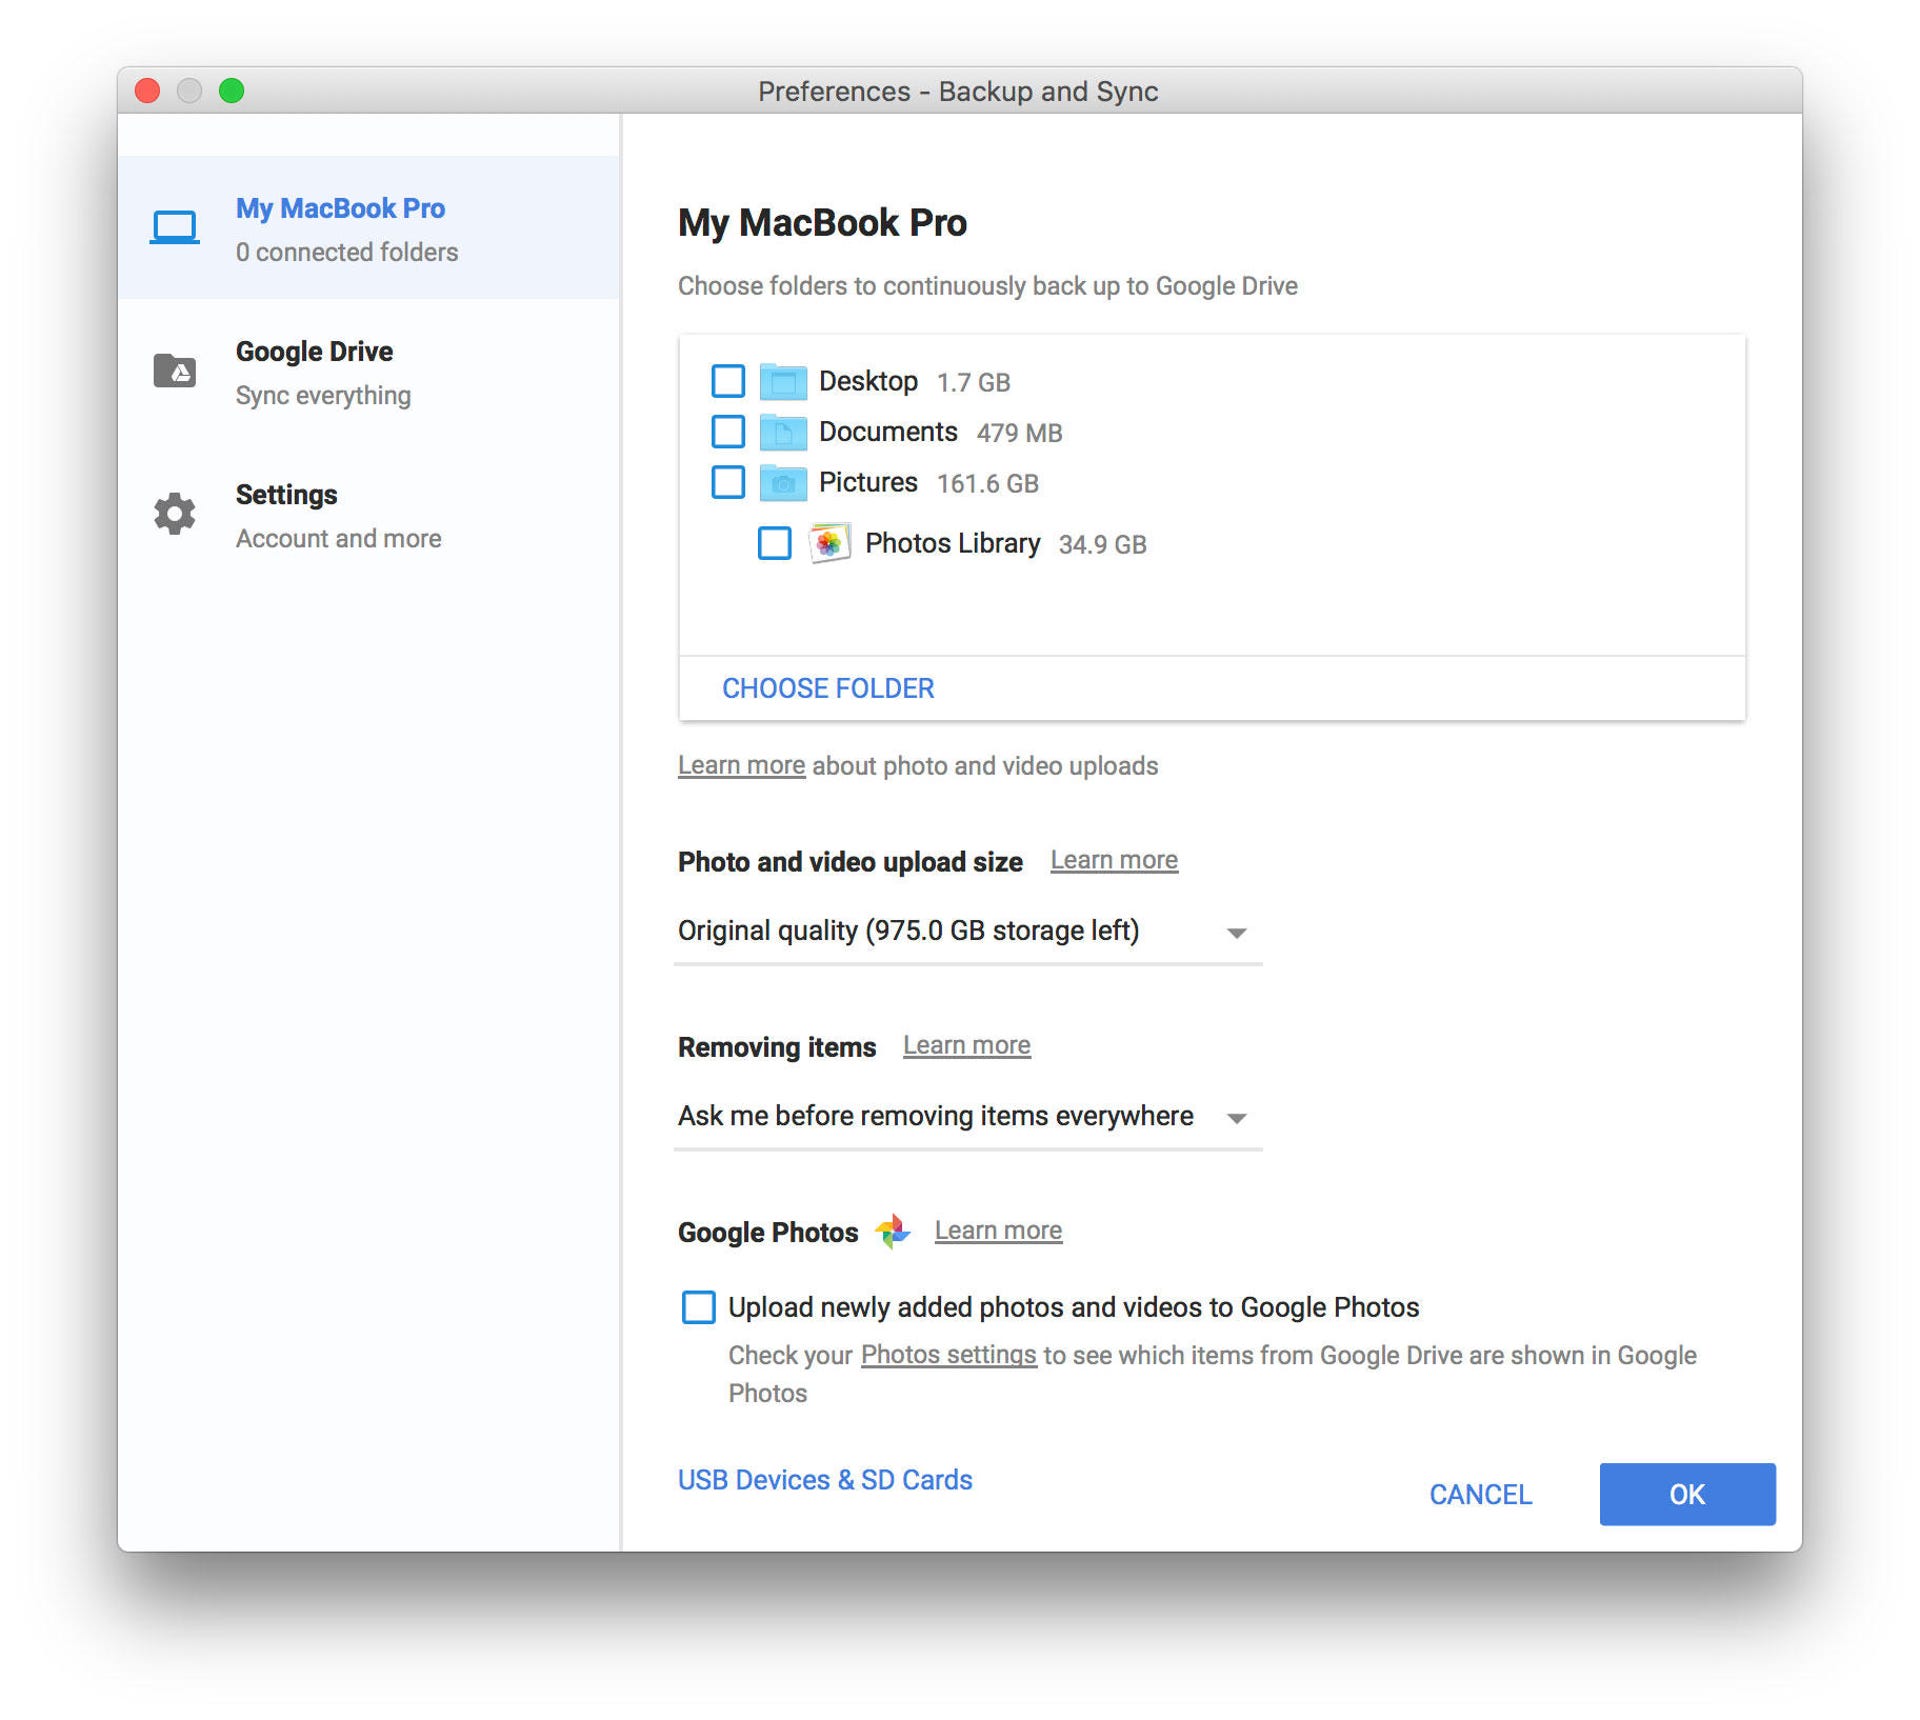 Google Backup and Sync works like Google Drive unless you actively enable its broader file-synchronization abilities.